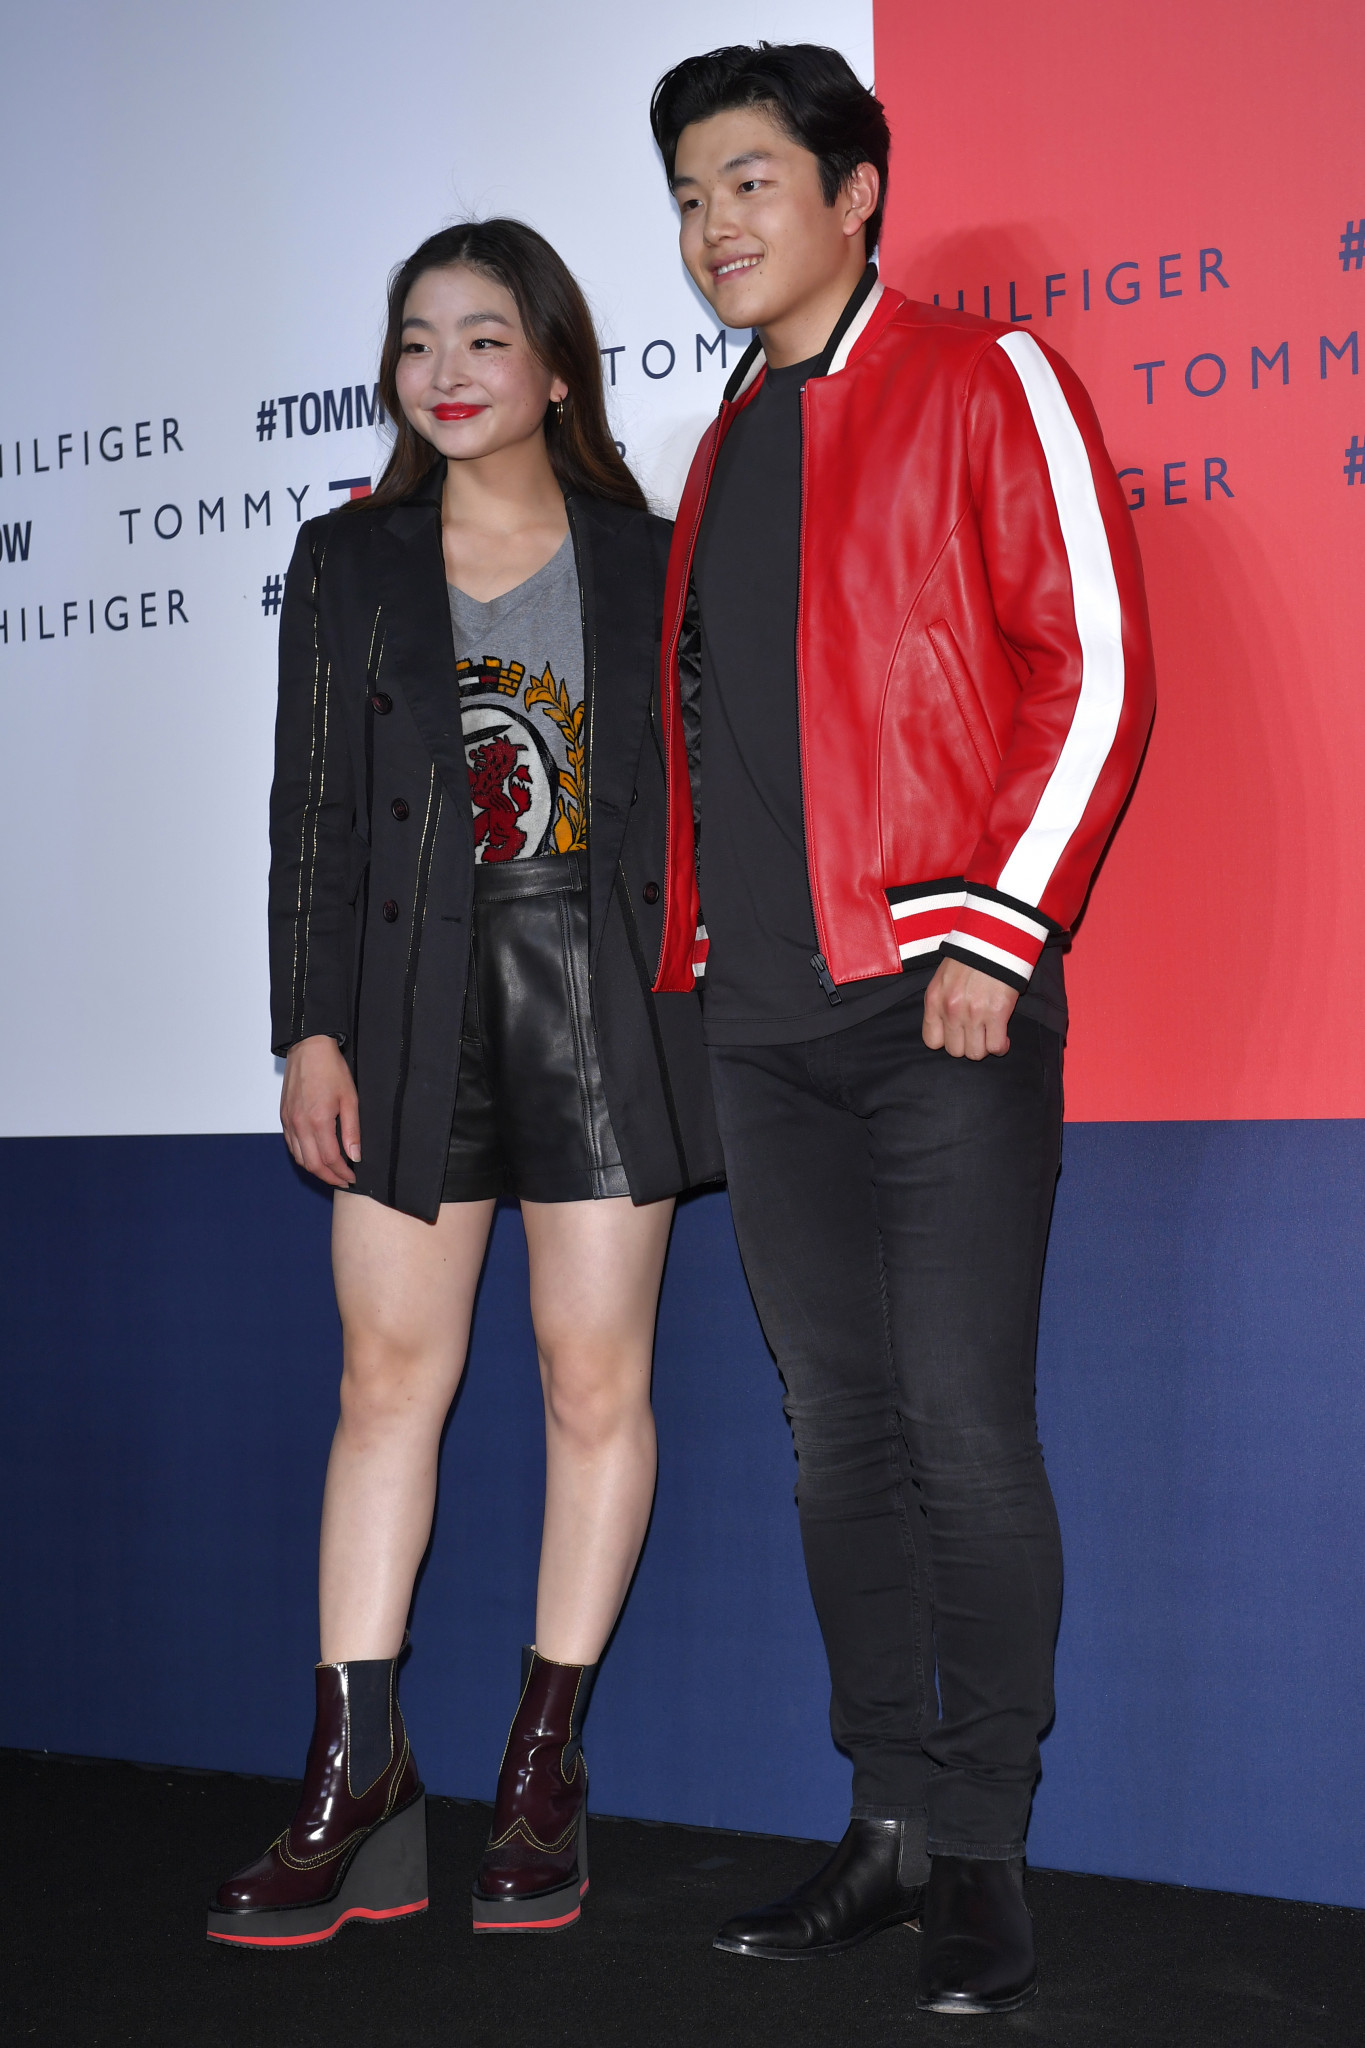 Figure skaters Maia and Alex Shibutani at a Tommy Hilfiger event in Tokyo ©Getty Images 